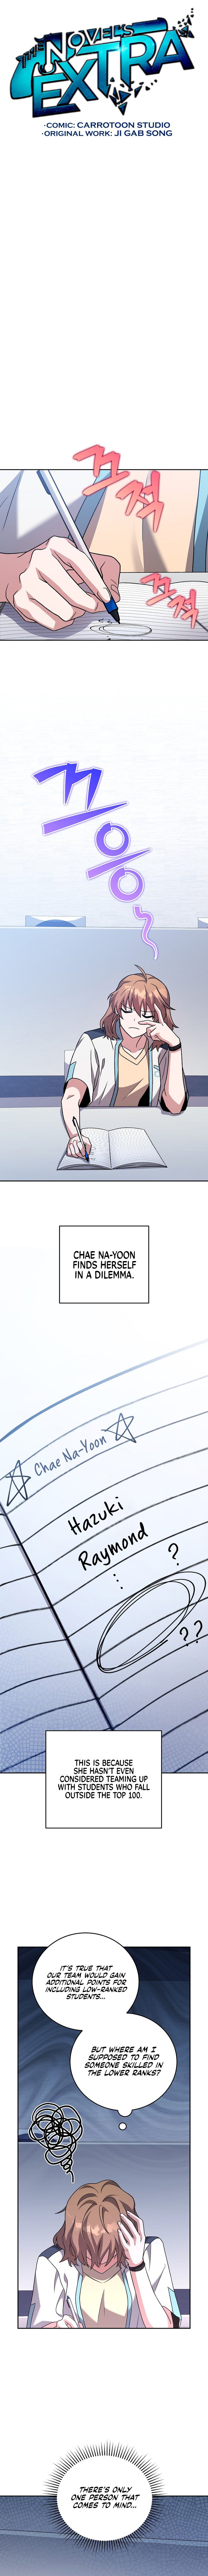 the-novels-extra-remake-chap-86-4